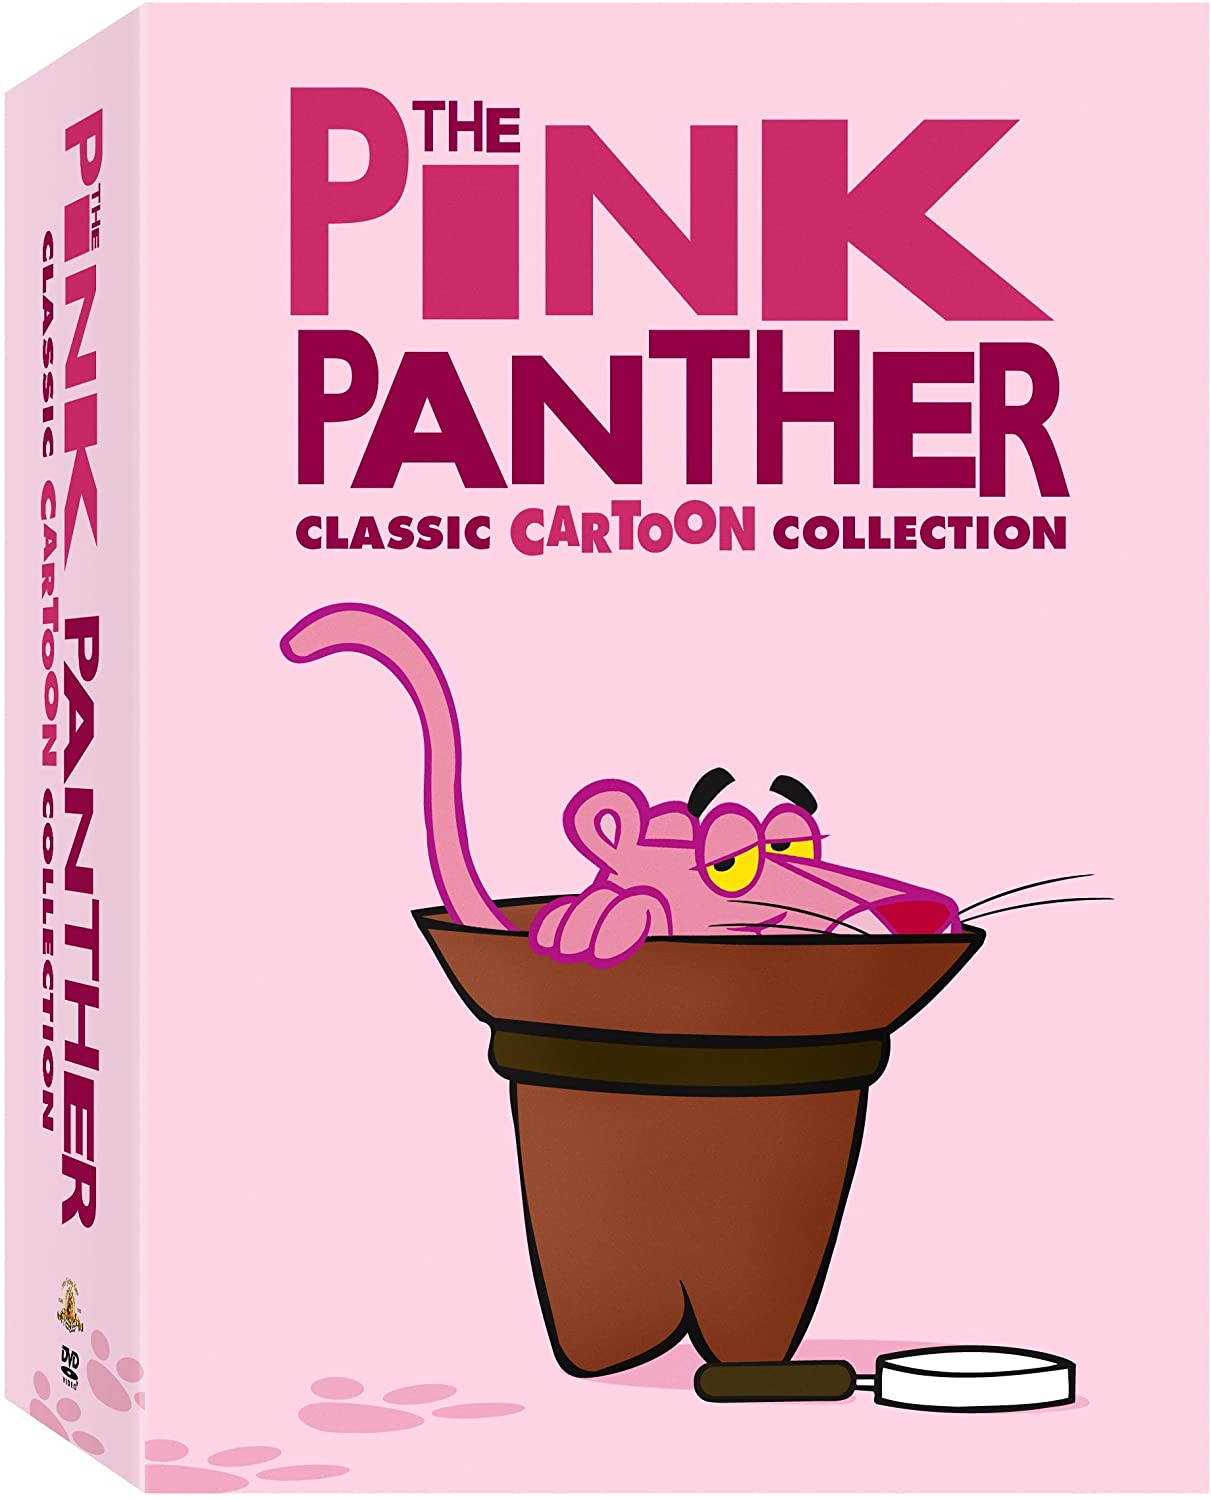 The Pink Panther Cartoon Collection: Volume 2 Blu-ray